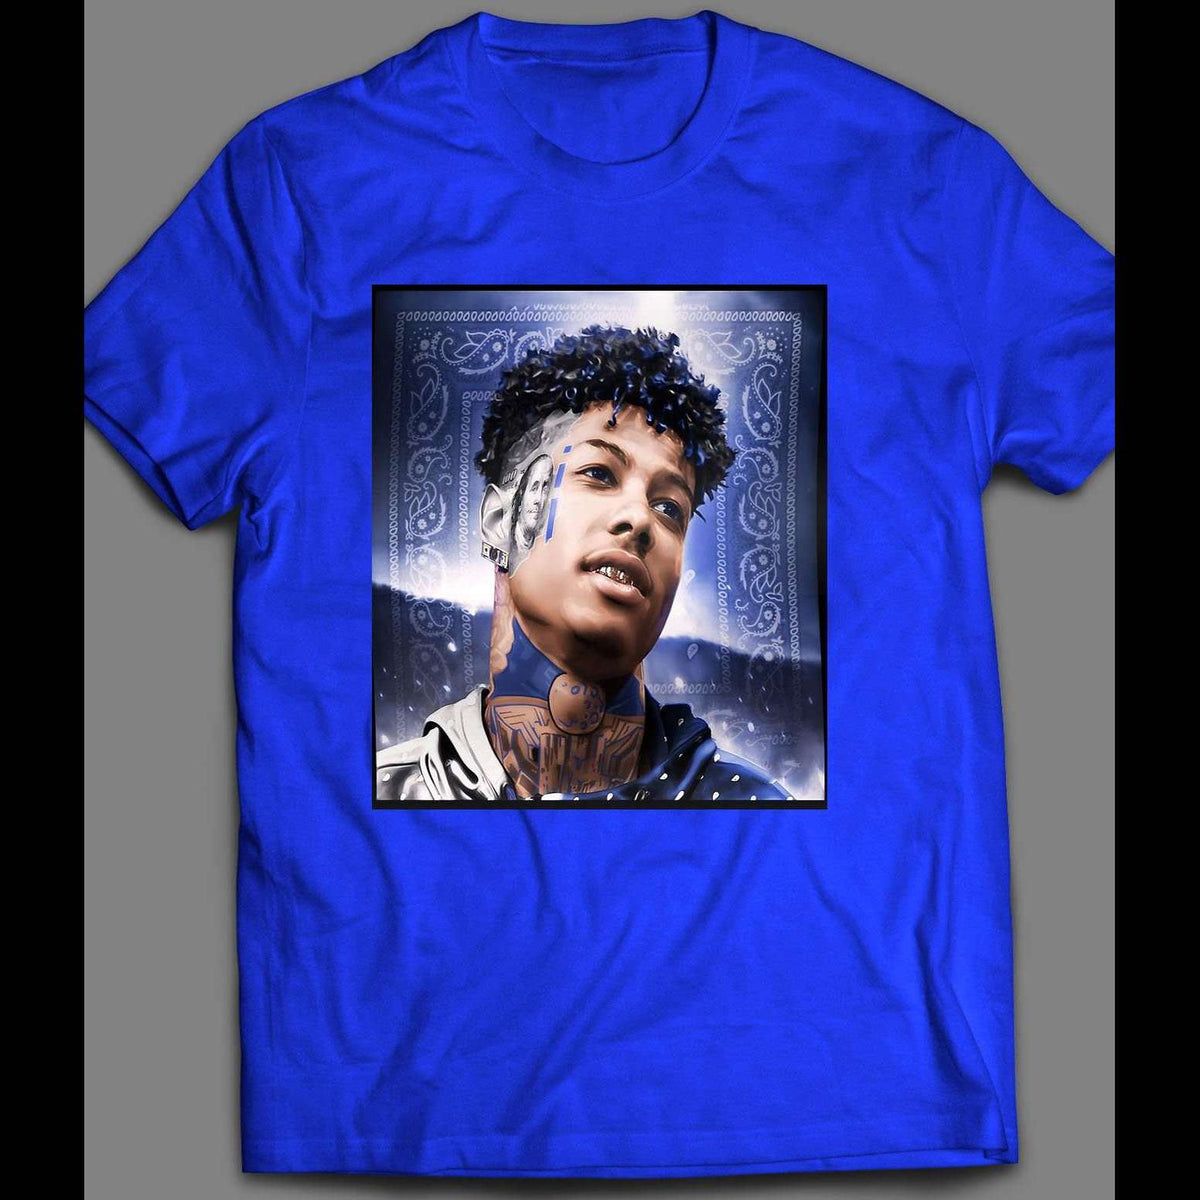 RAPPER BLUEFACE BABY HIP HOP ART T-SHIRT | 80's, 90's to Today Quality Artistic ...1200 x 1200